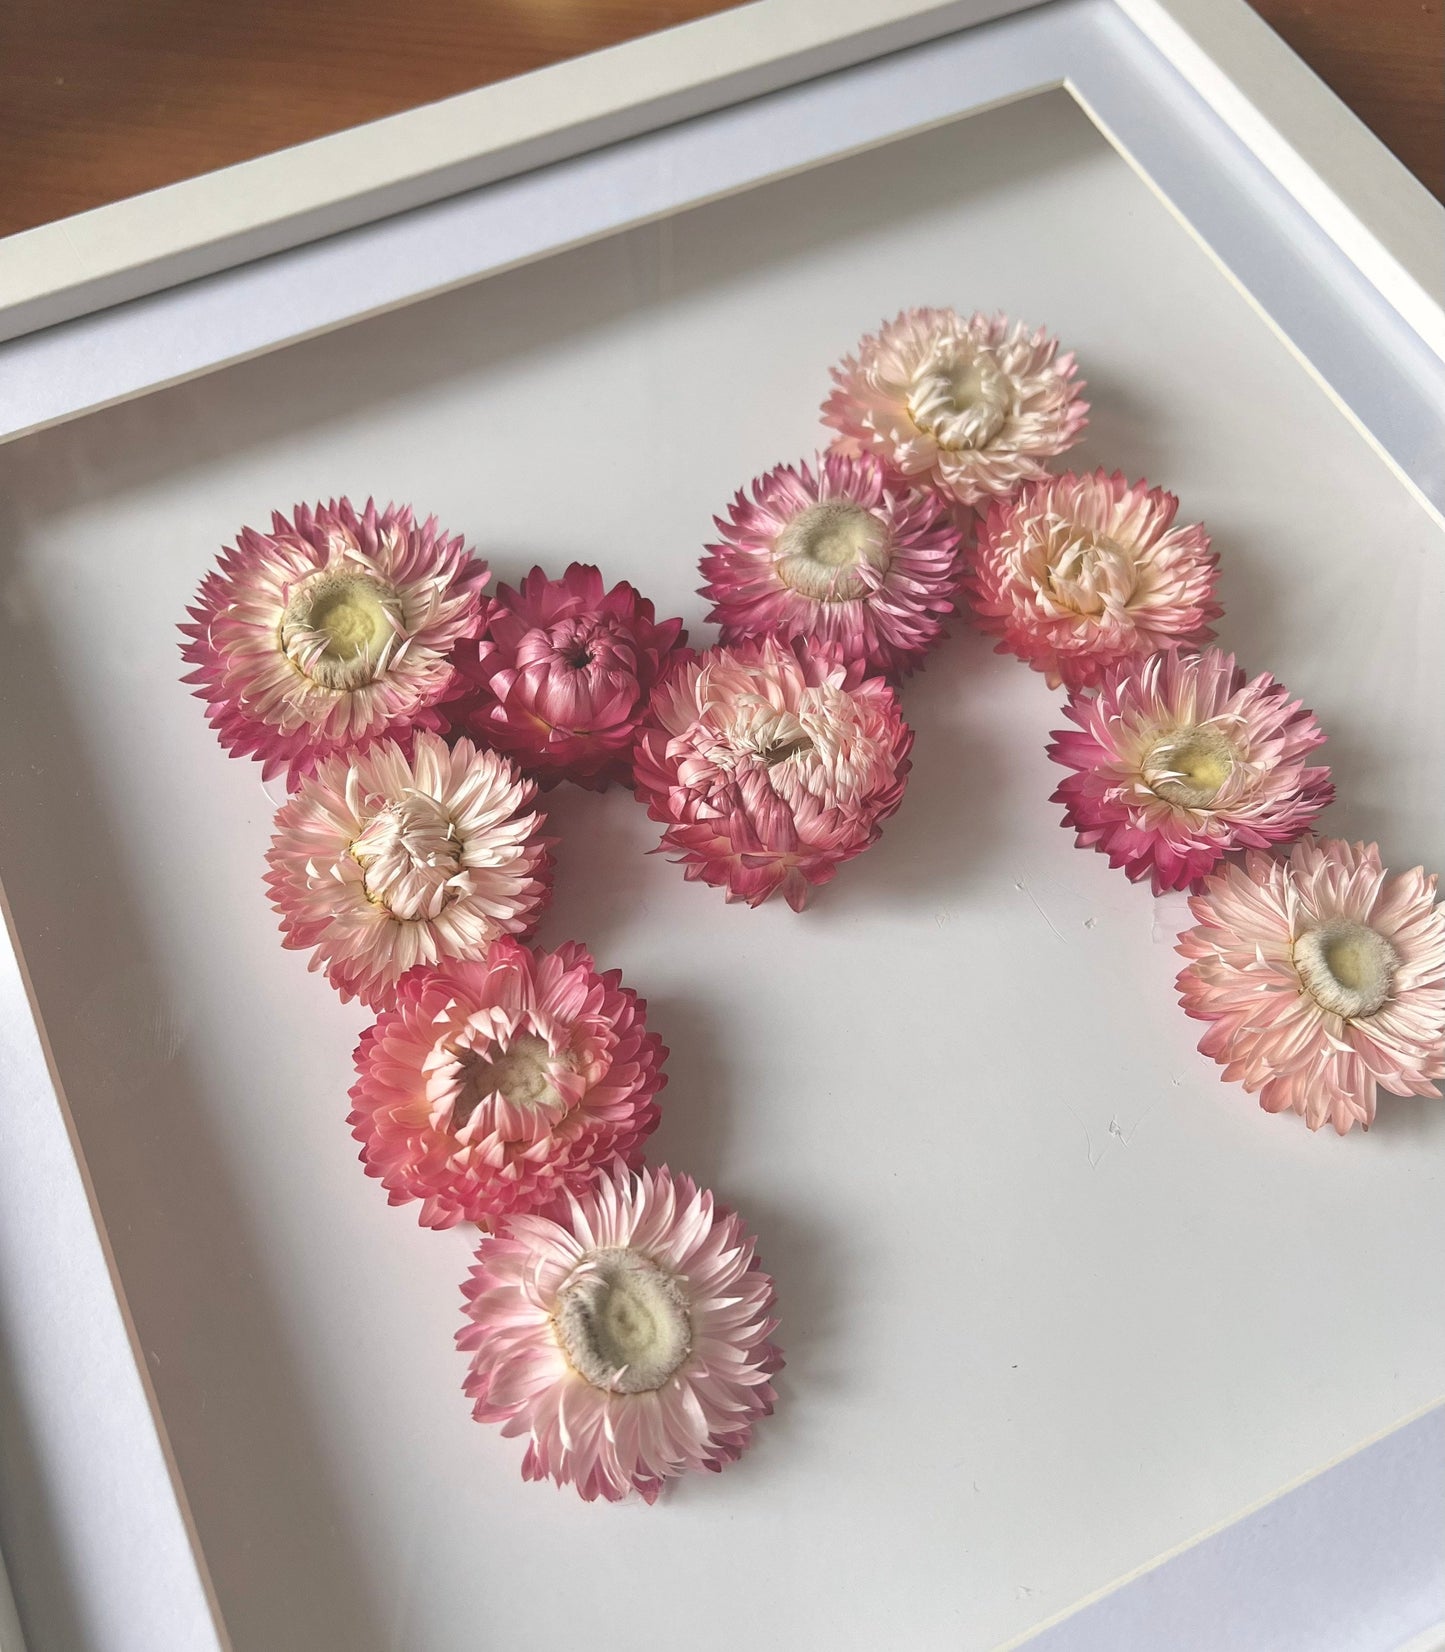 Initial Letter Floral Framed Wall Decor, Dried Flower Framed Box Decoration, Personalised Initial Letter Birthday Baby Shower Gift Pastels